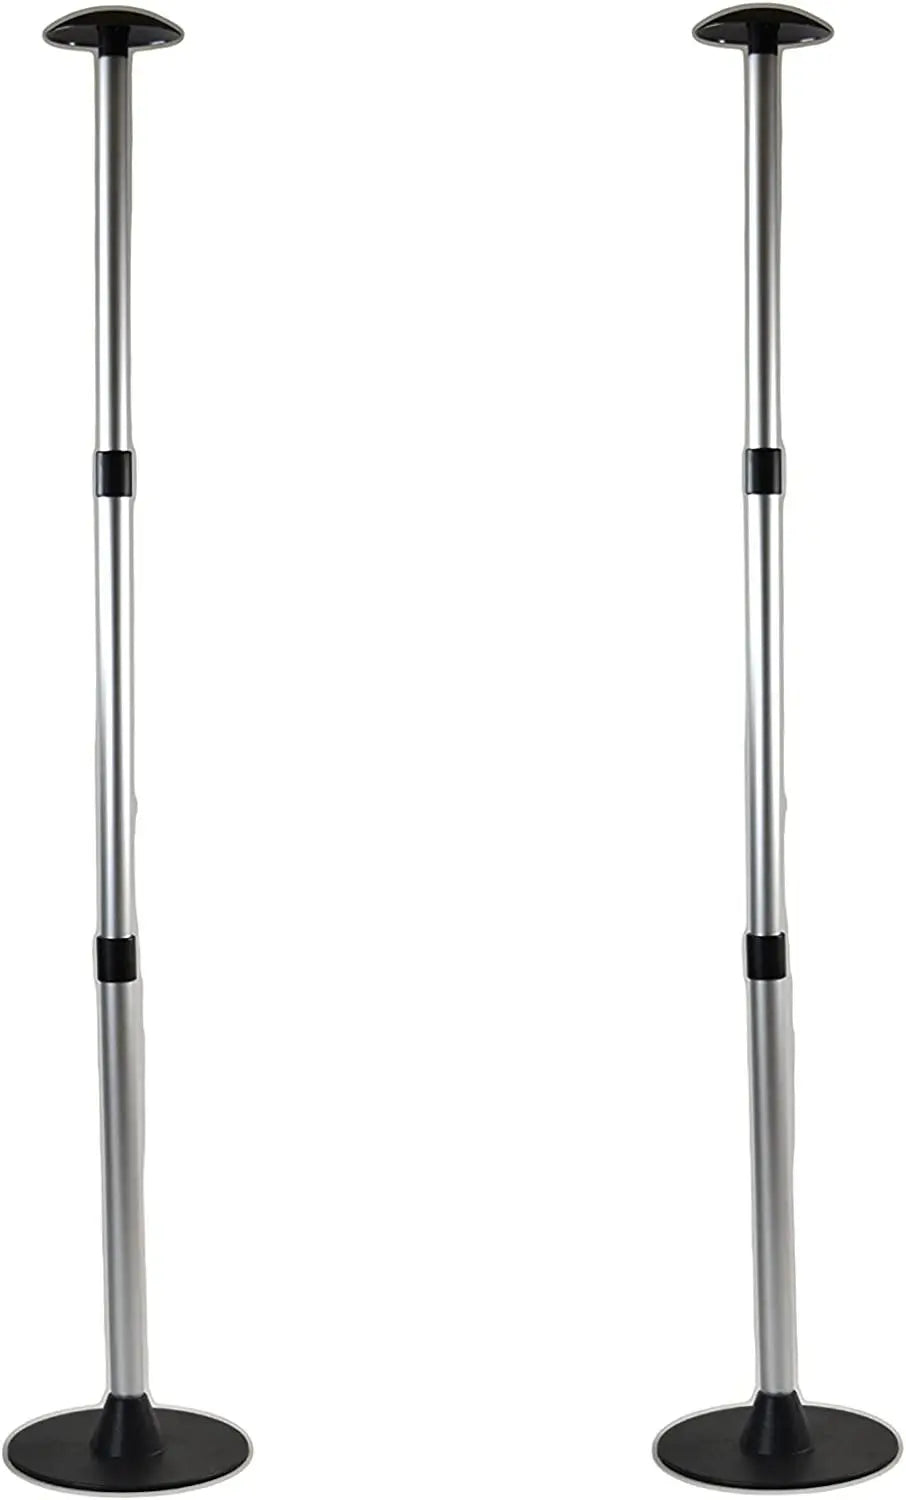 MARINE CITY (MC30160112-2 Aluminum Telescoping Spherical-top Boat Cover 3 Section Support Stand Pole (2Pcs) - Image #1